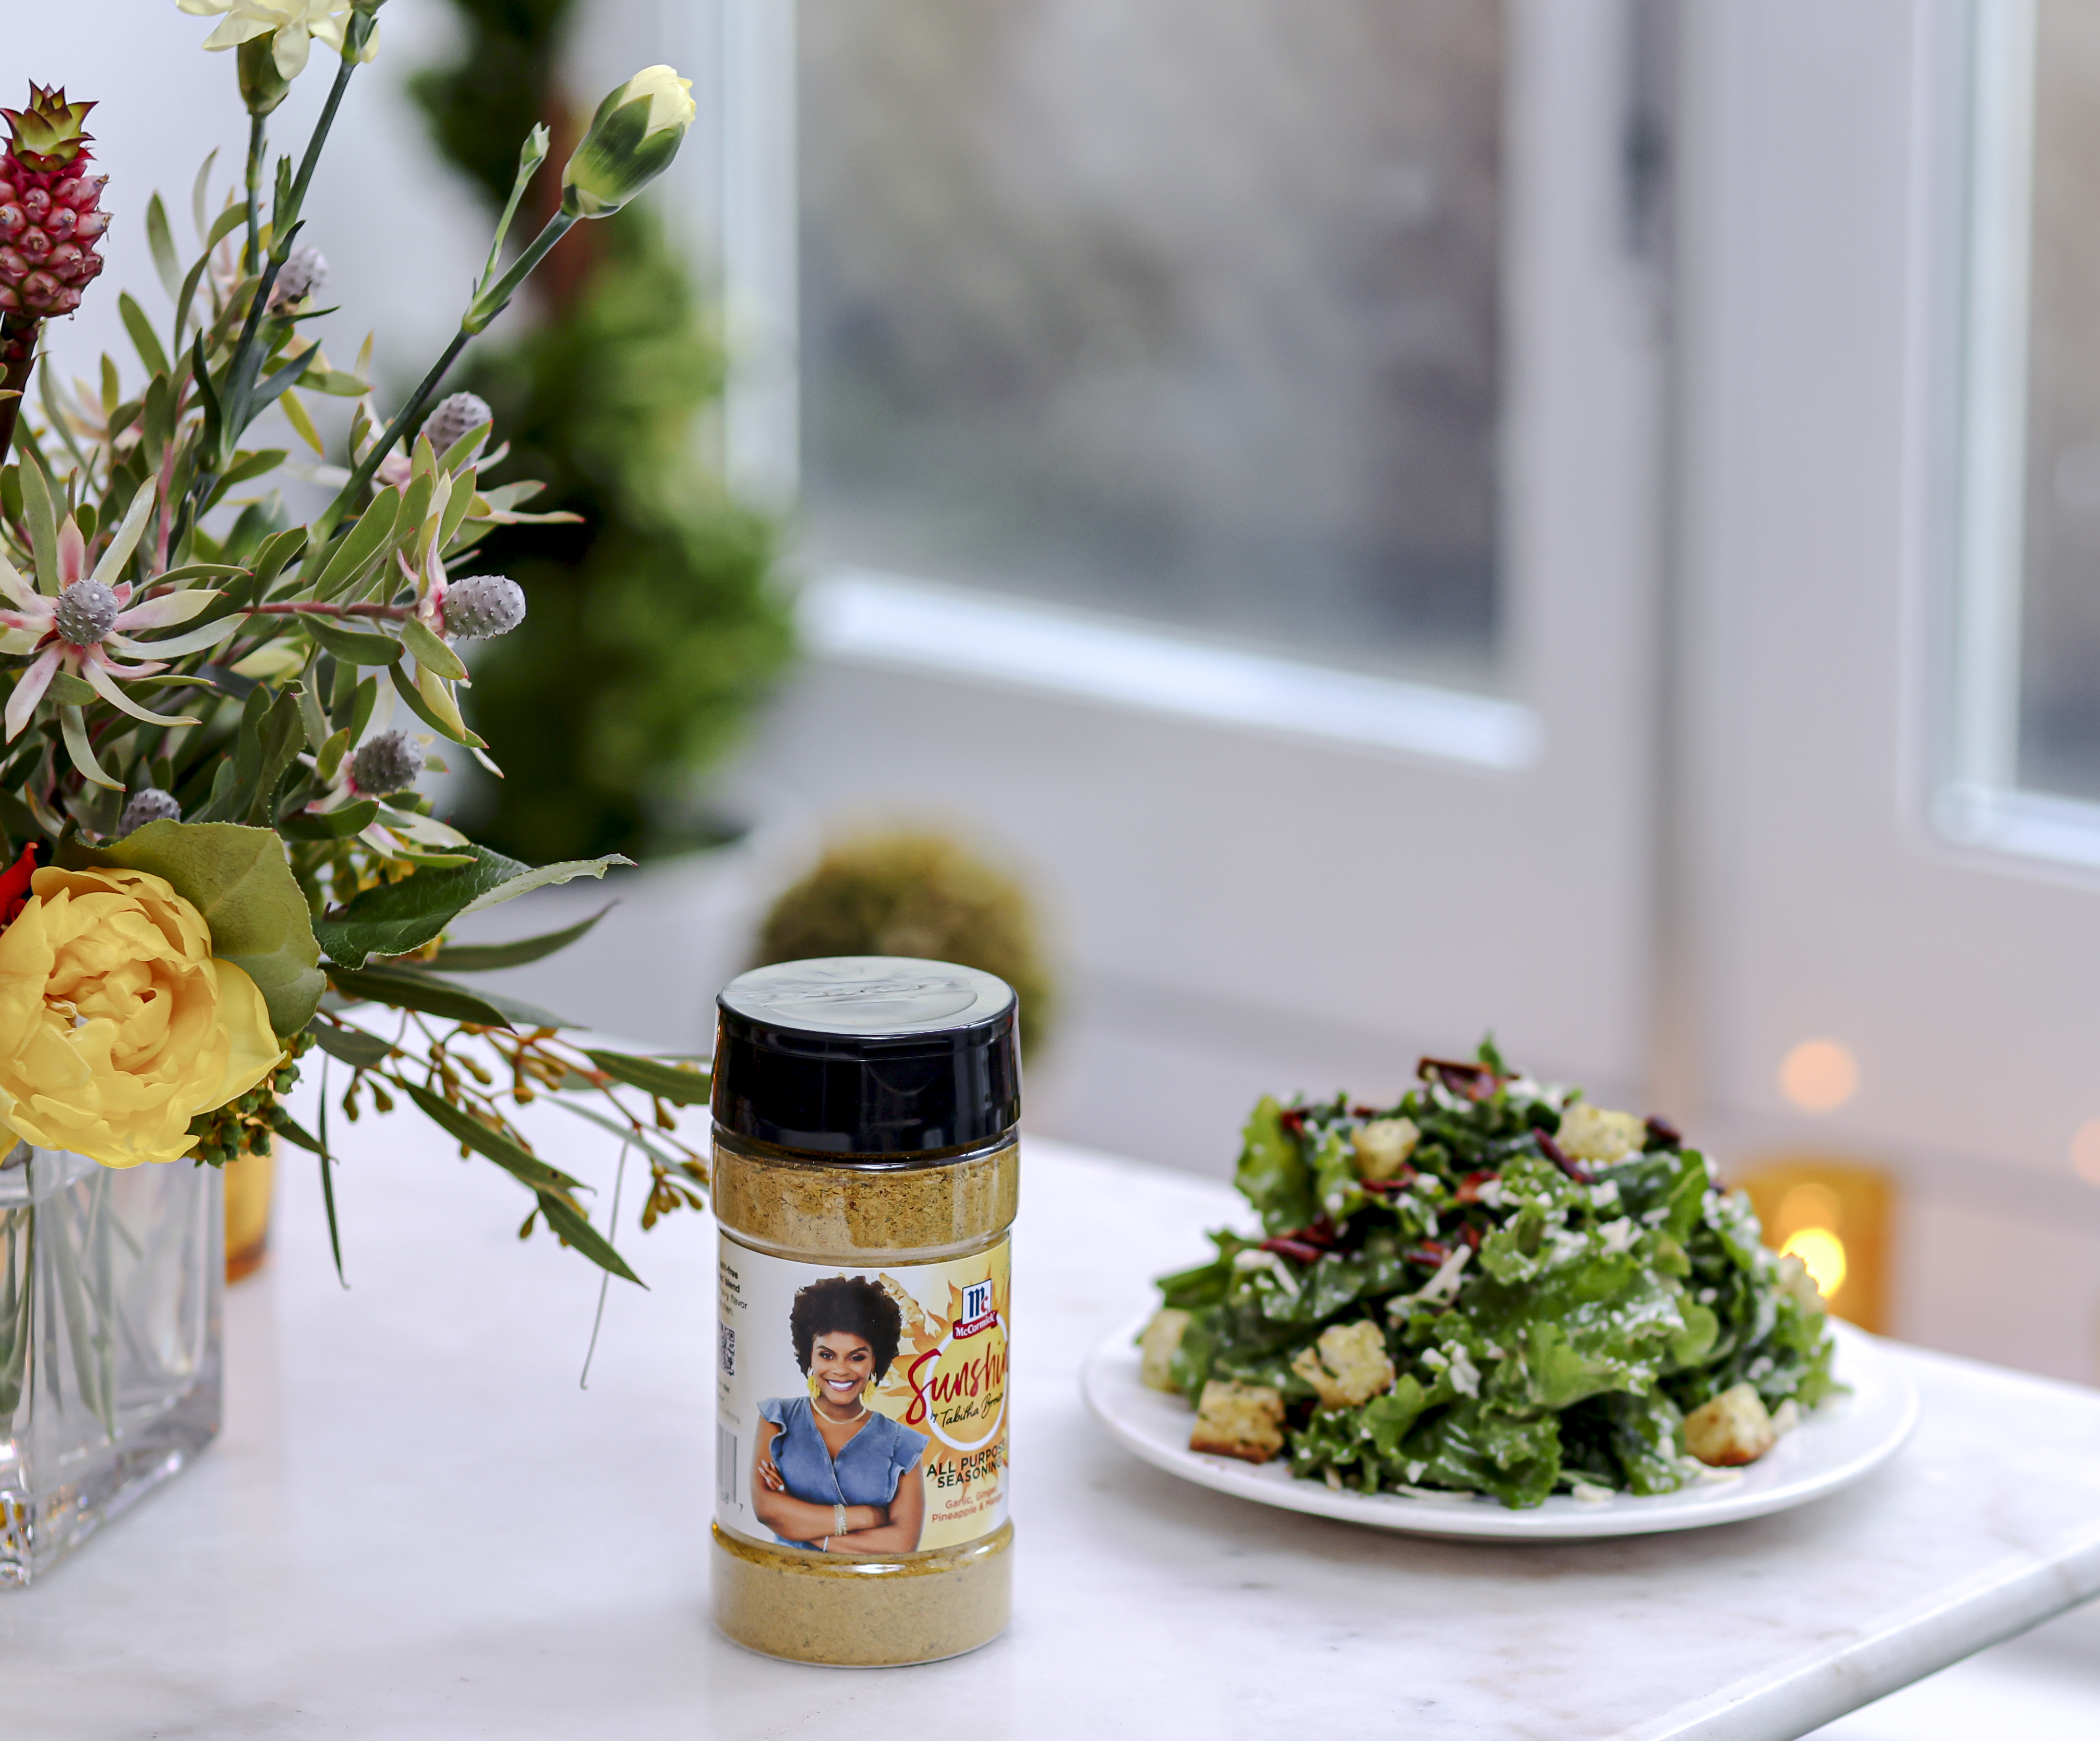 Tabitha Brown's Sold-Out McCormick Sunshine Seasoning is Coming to Grocery  Stores in June - VEGWORLD Magazine